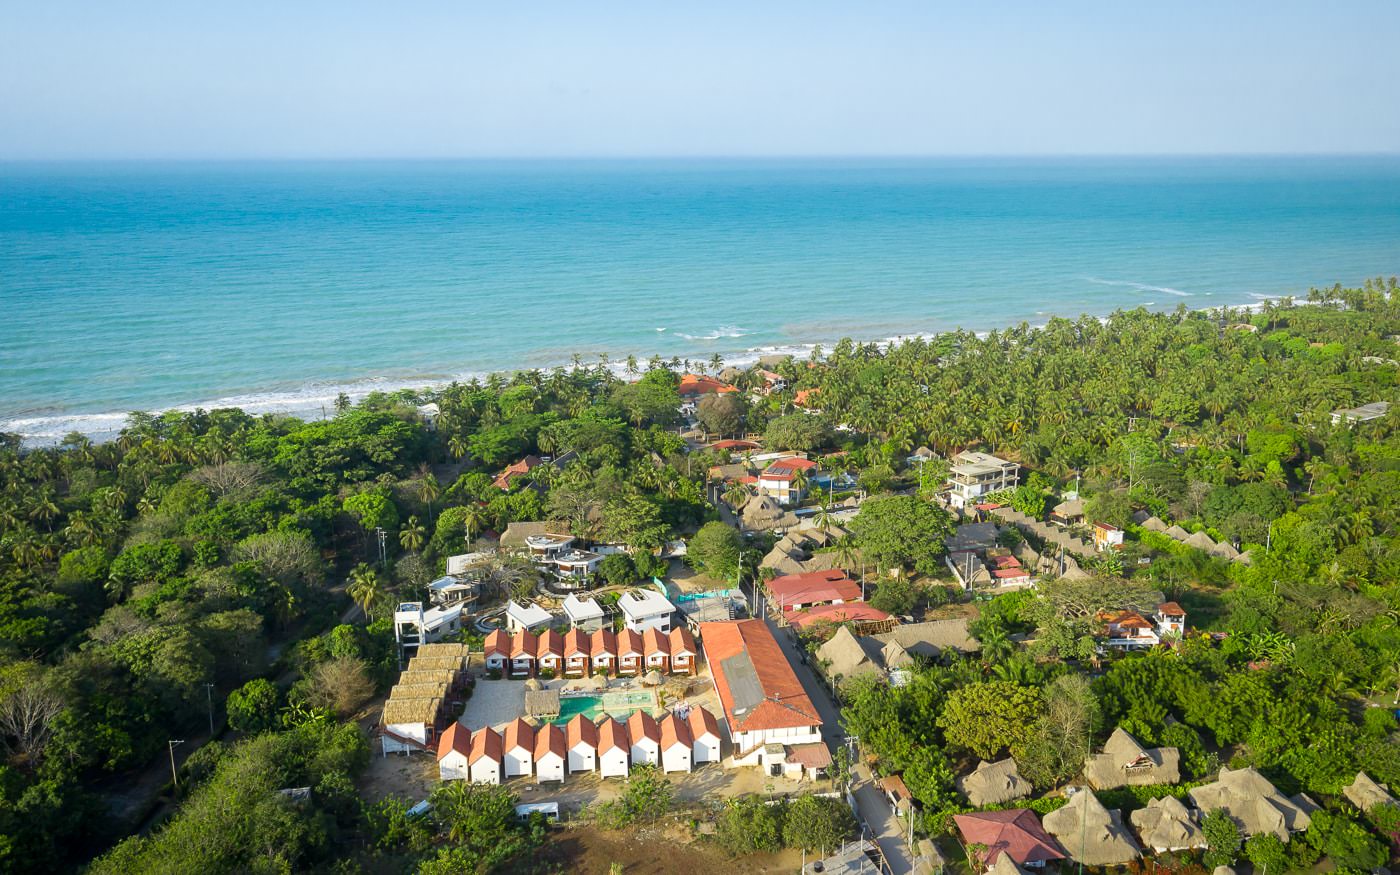 Palomino Beach in Colombia